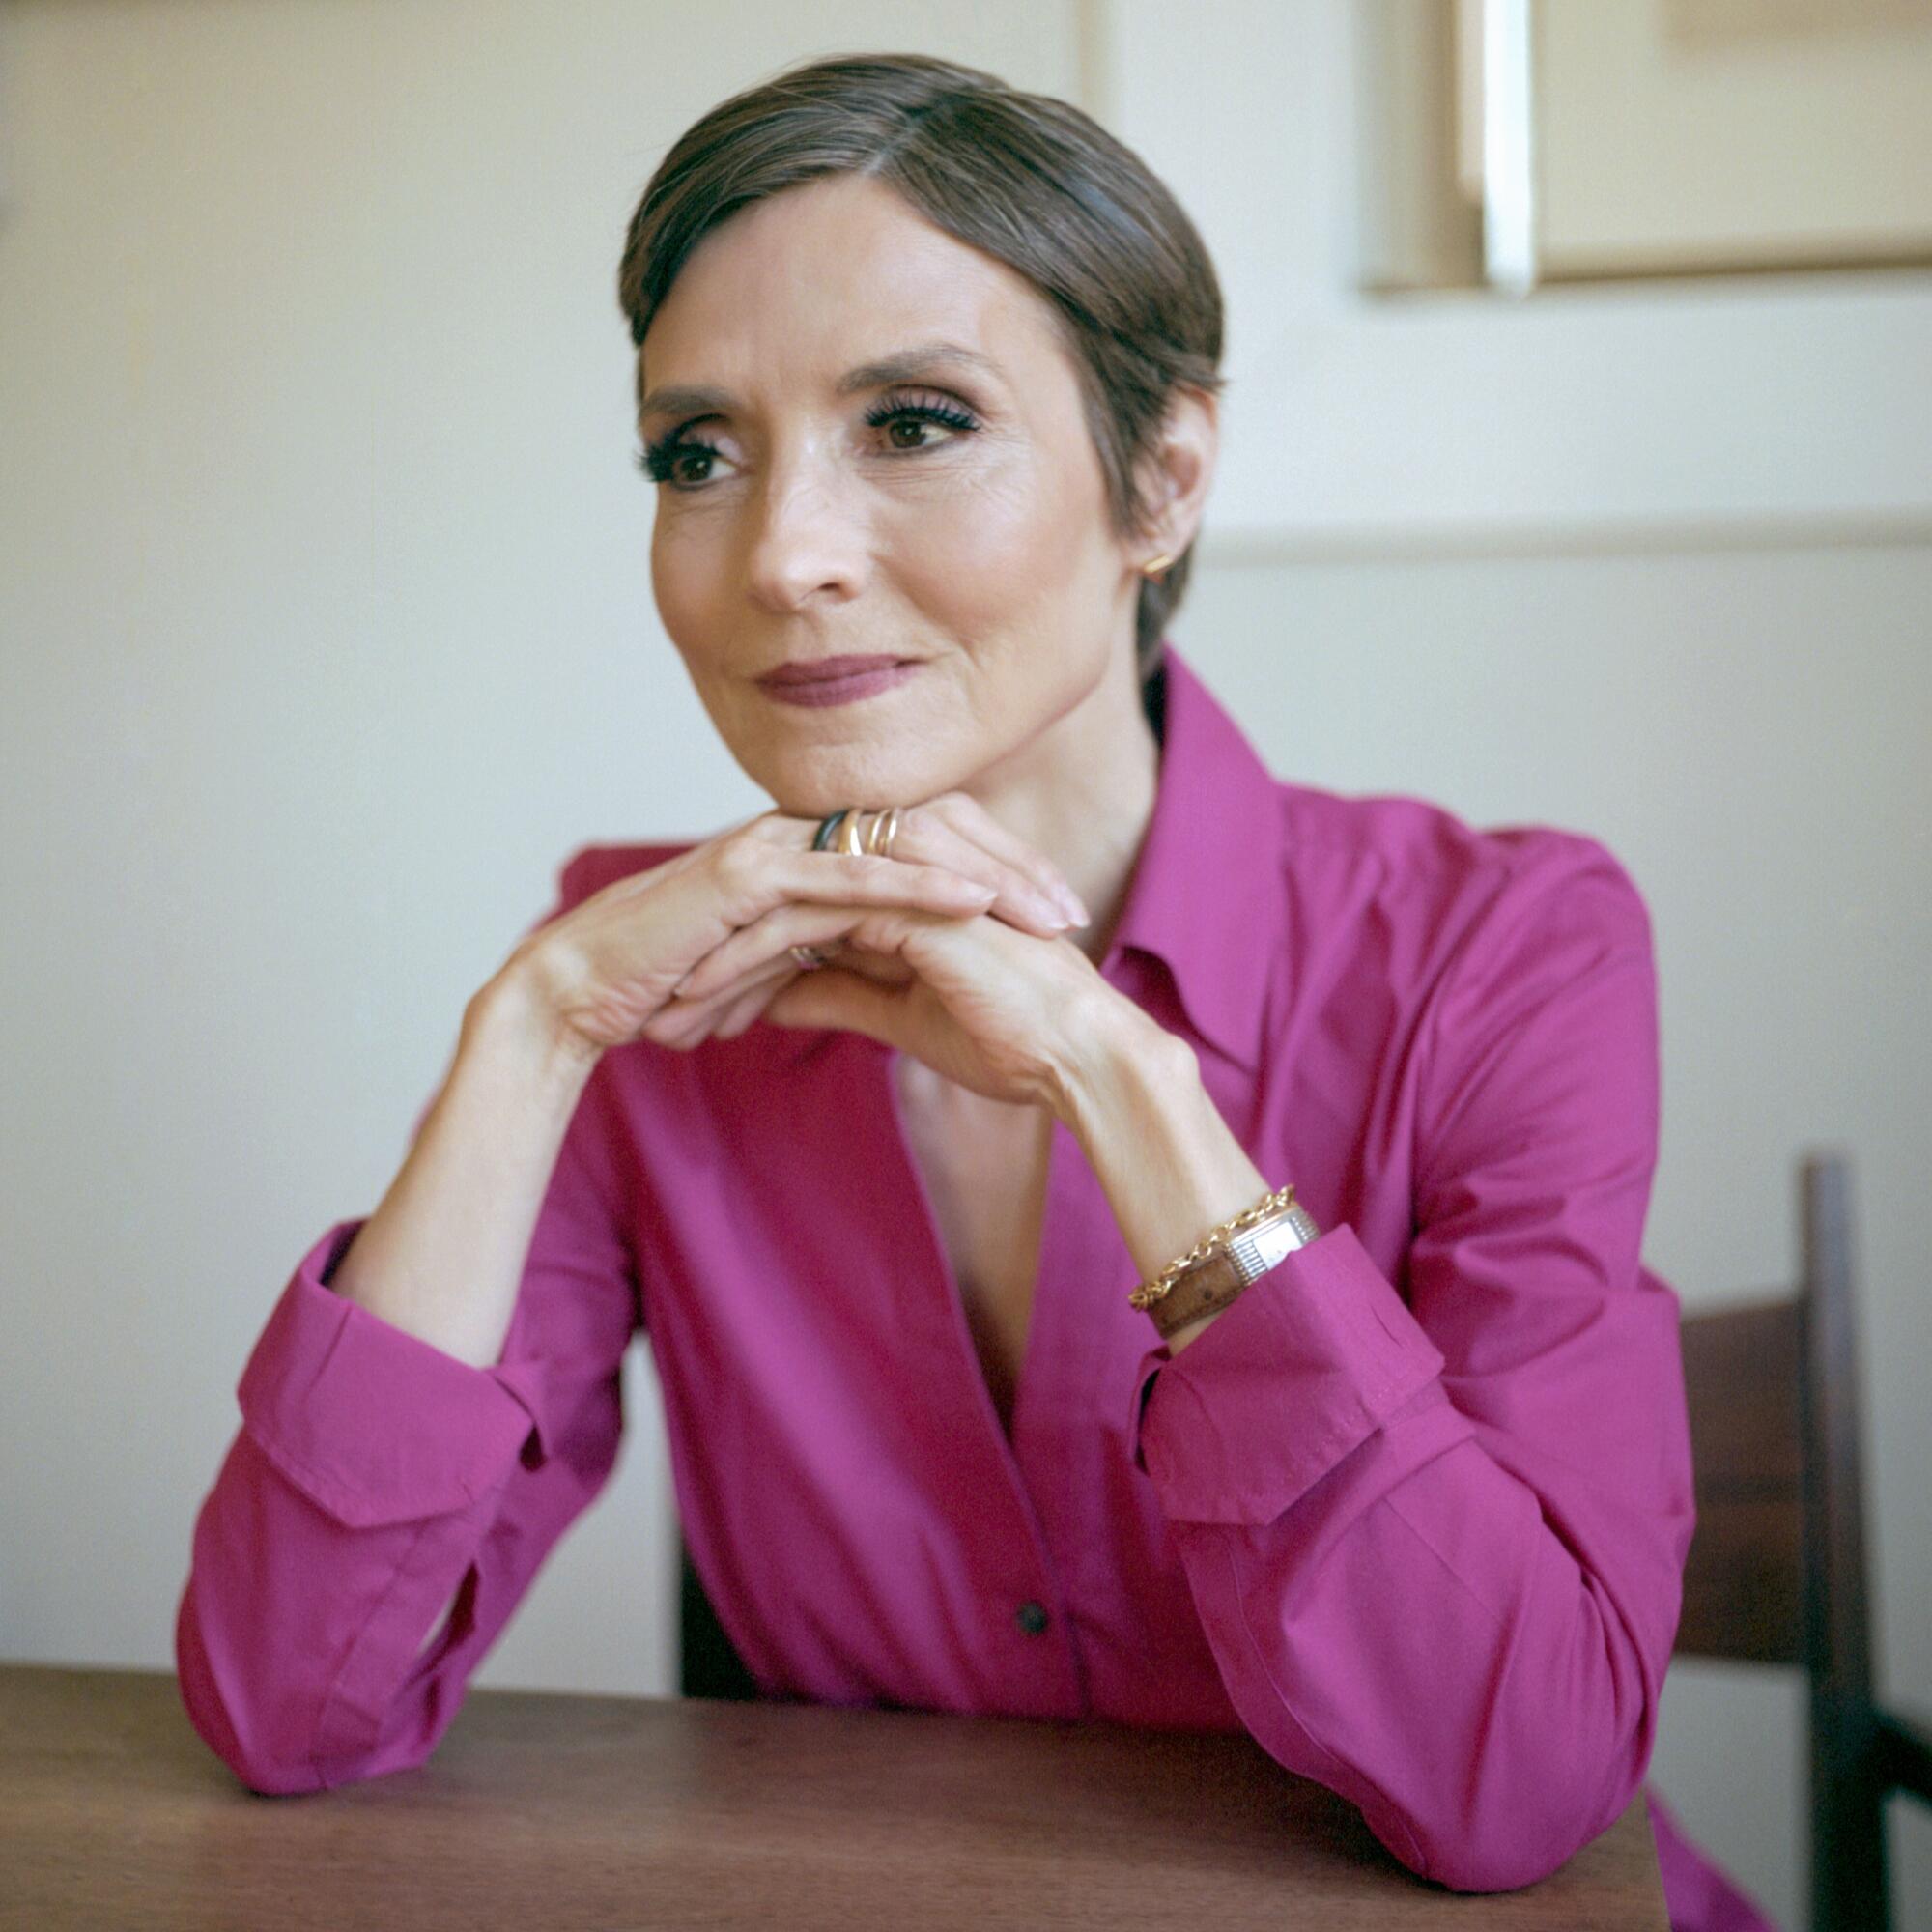 CBS News investigative reporter Catherine Herridge poses for a portrait in her home